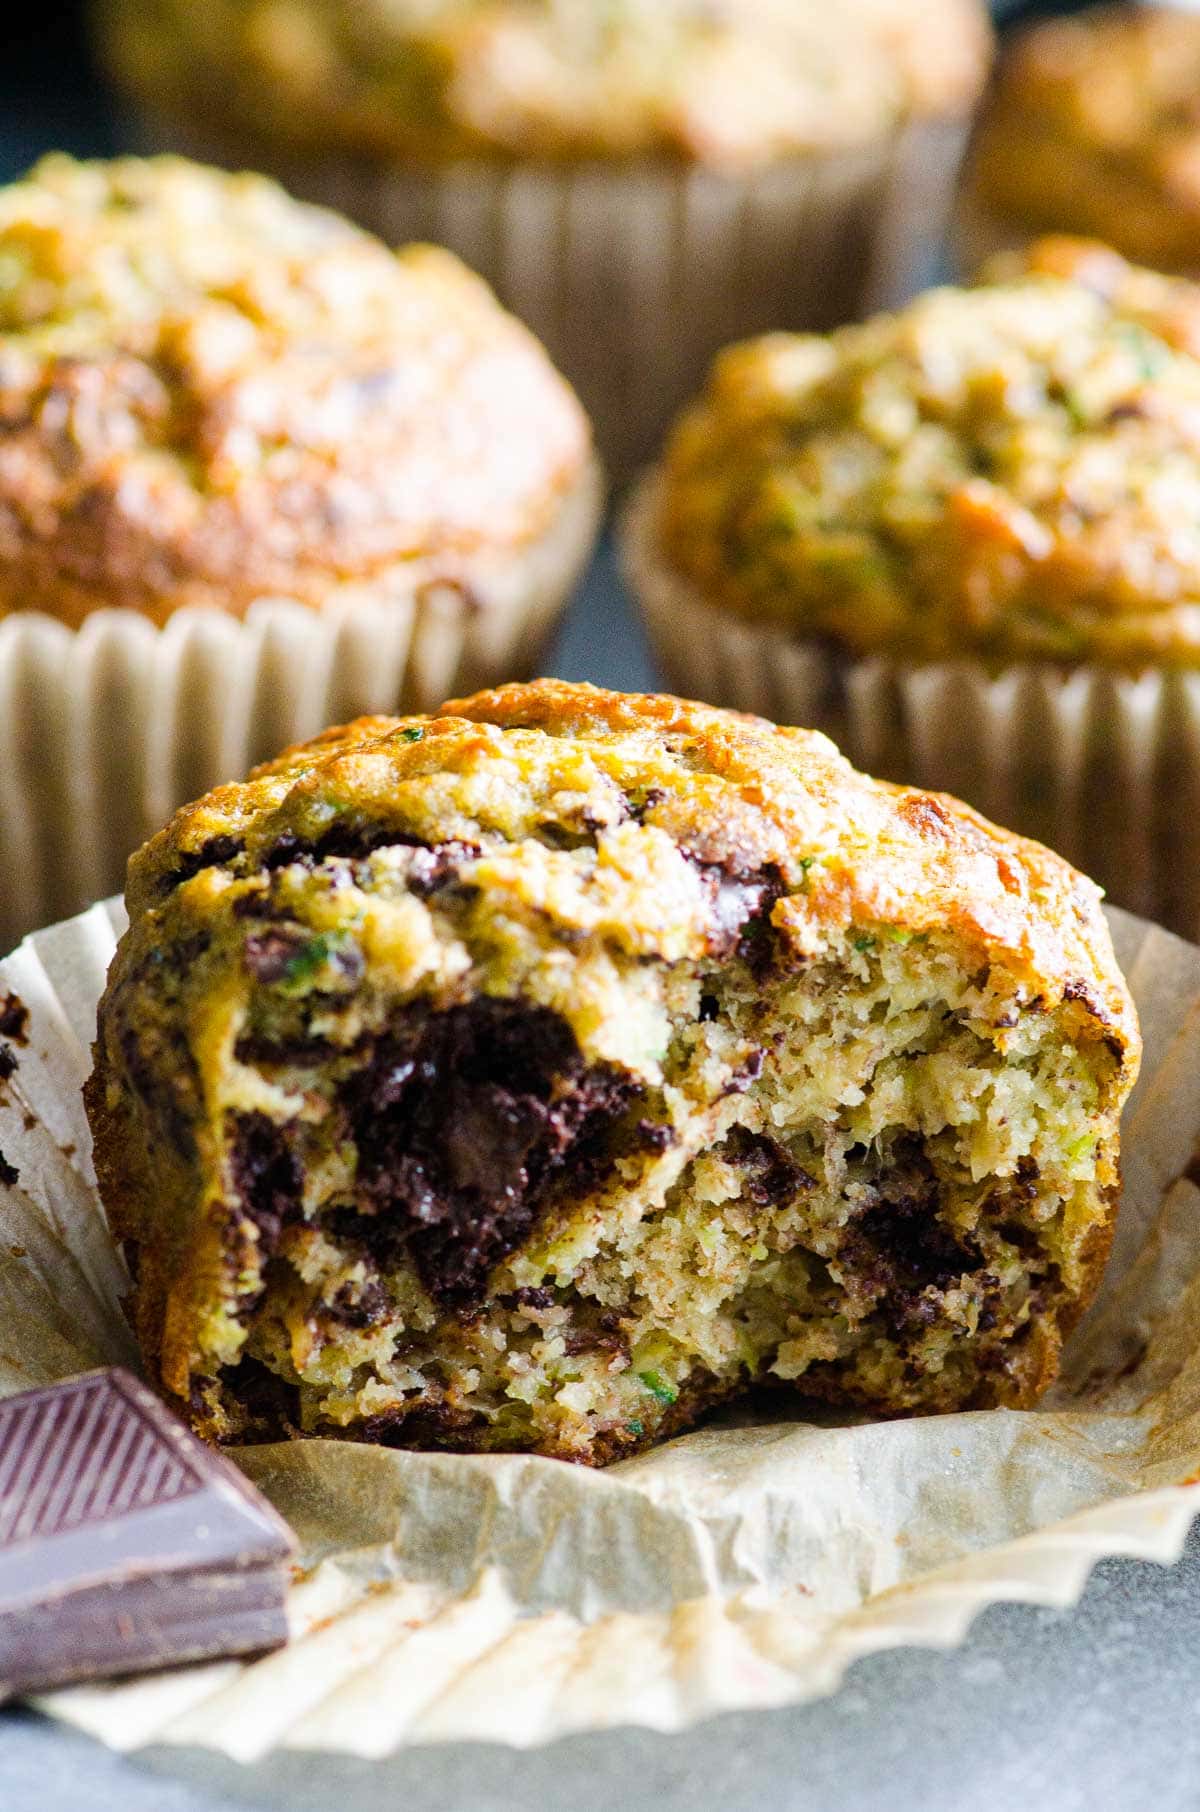 Banana zucchini muffins with one unwrapped and a bite missing.